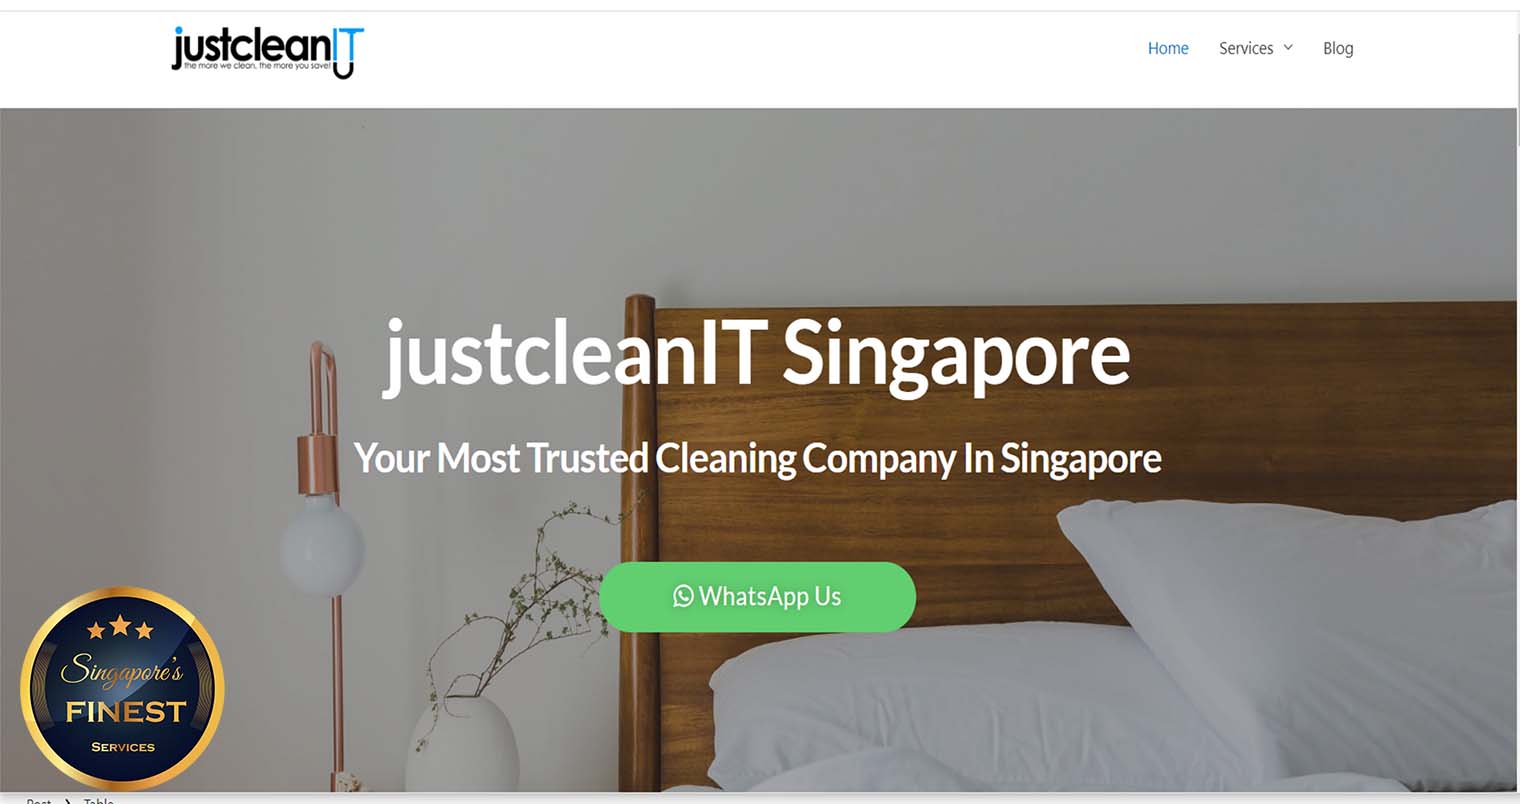 justcleanIT - Mattress Cleaning Singapore